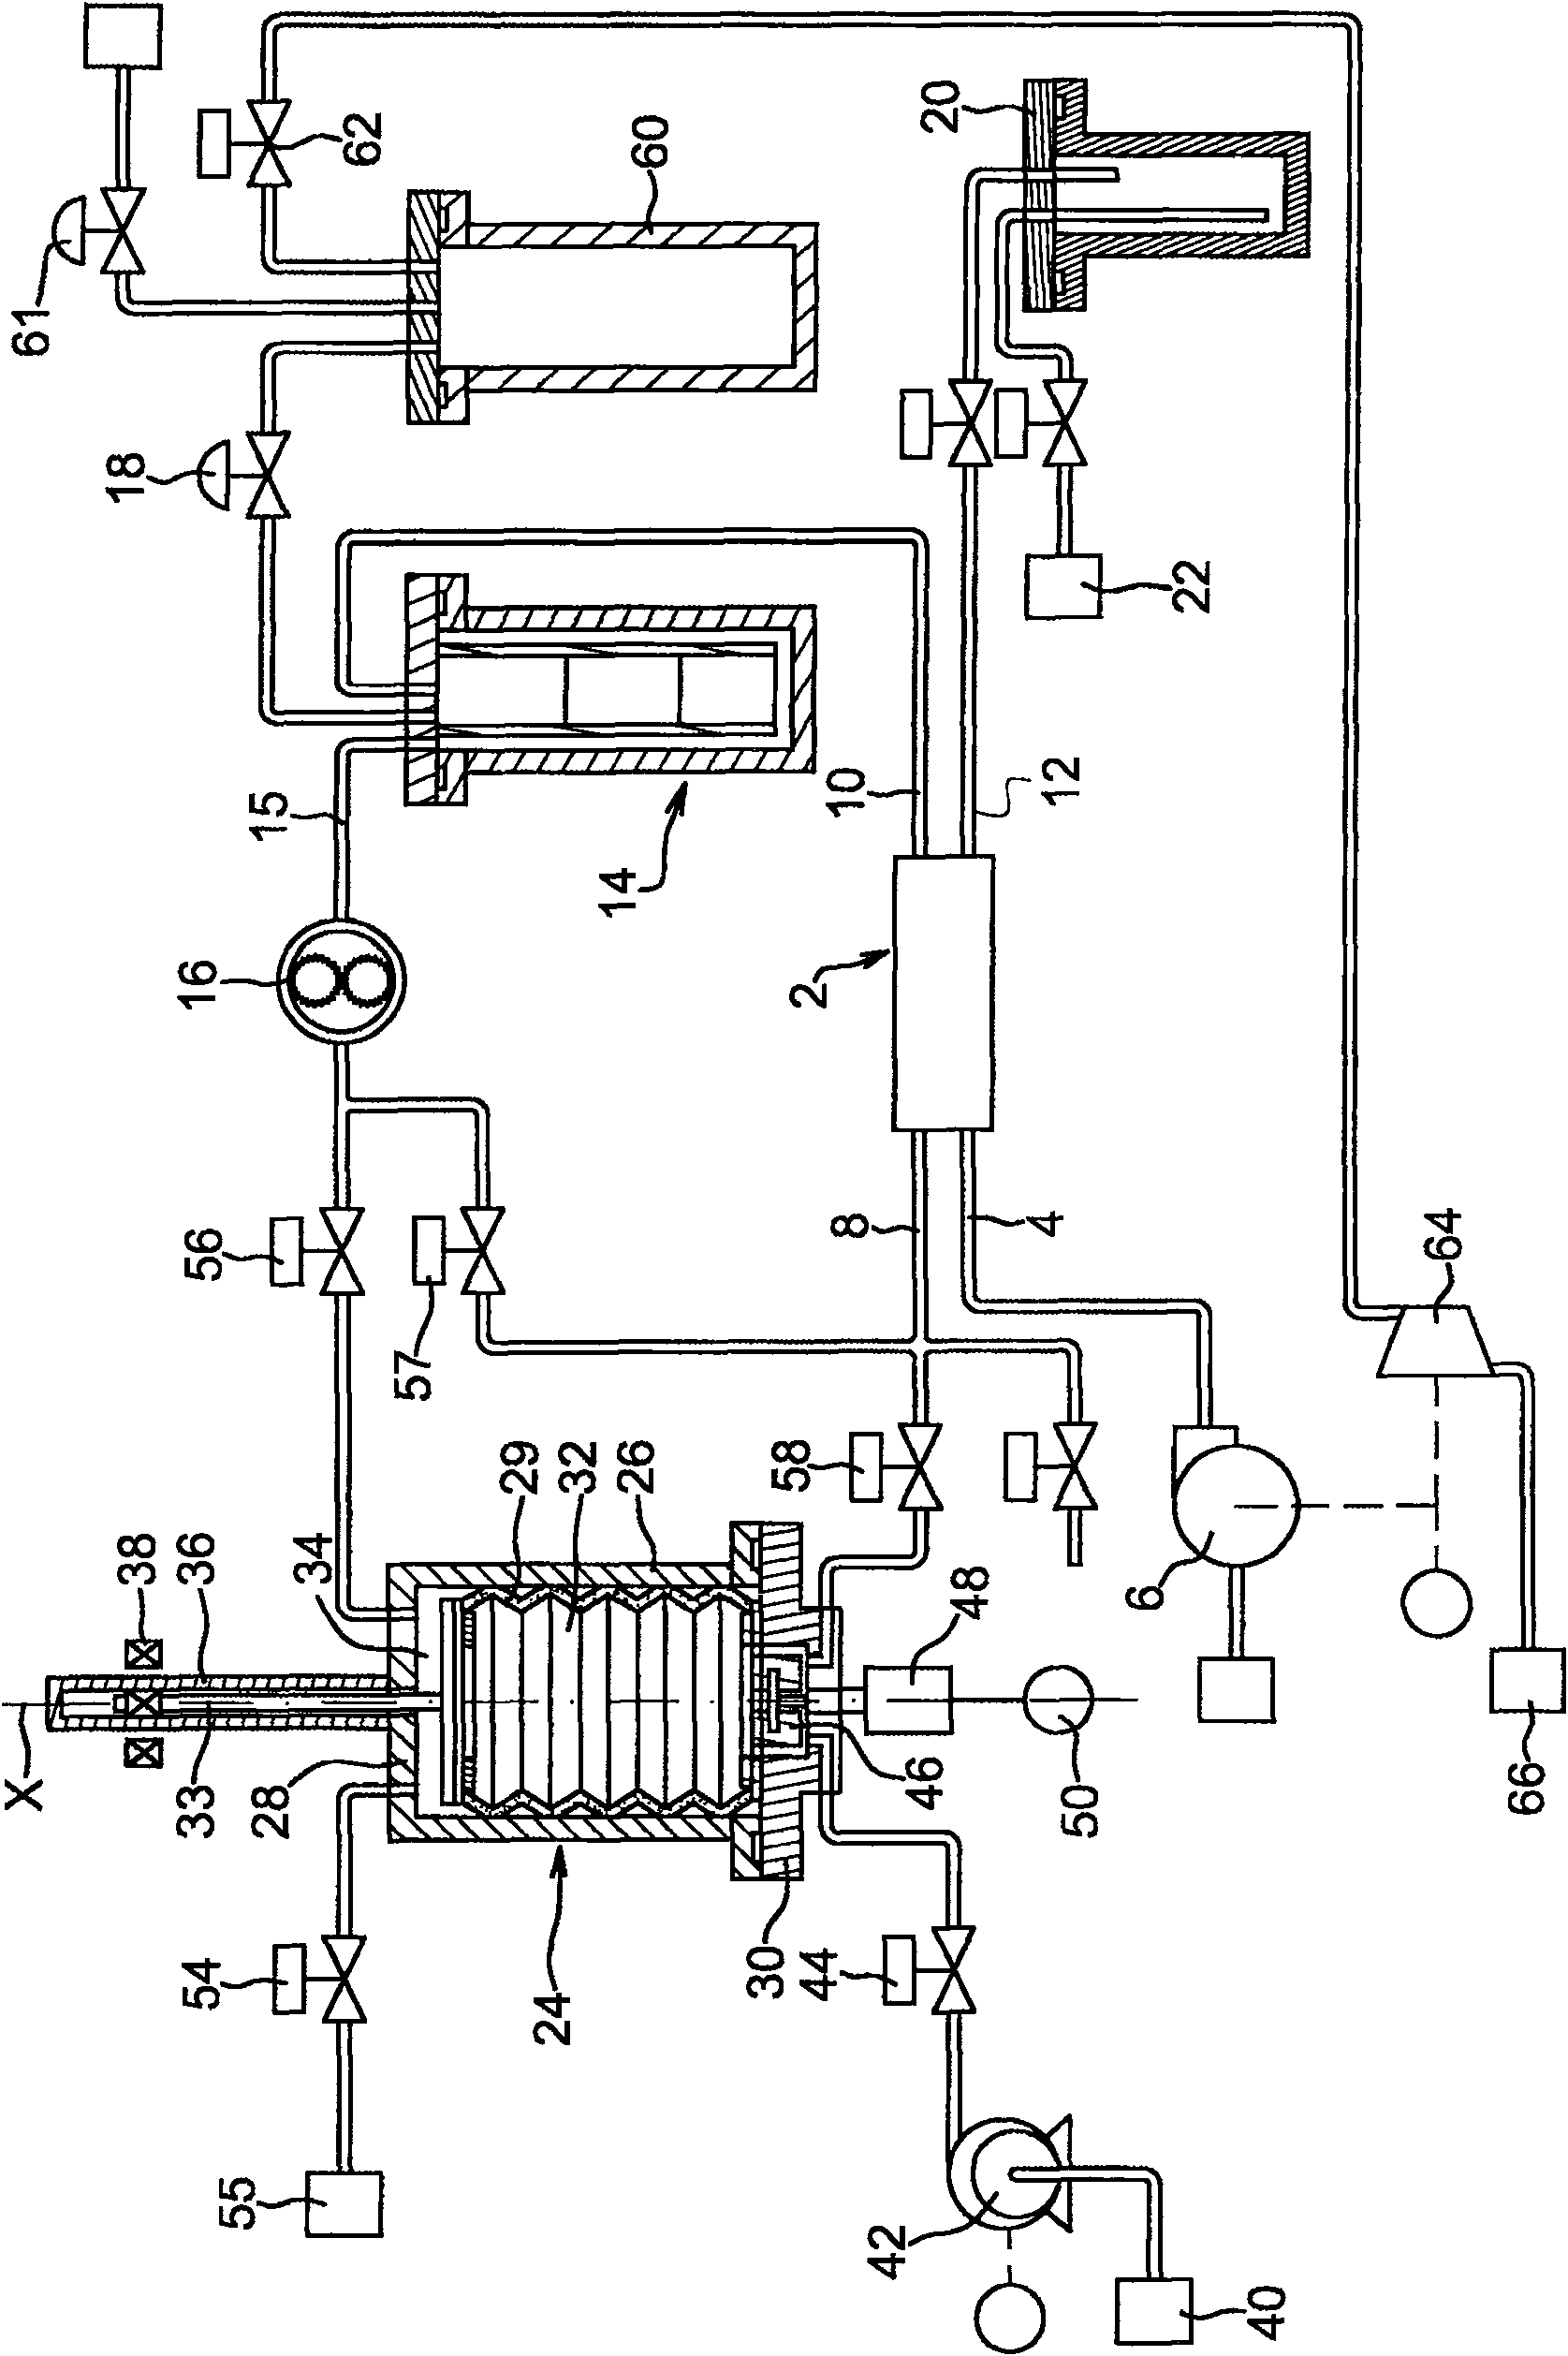 Device and installation for injecting particulate materials into a chamber, and corresponding method